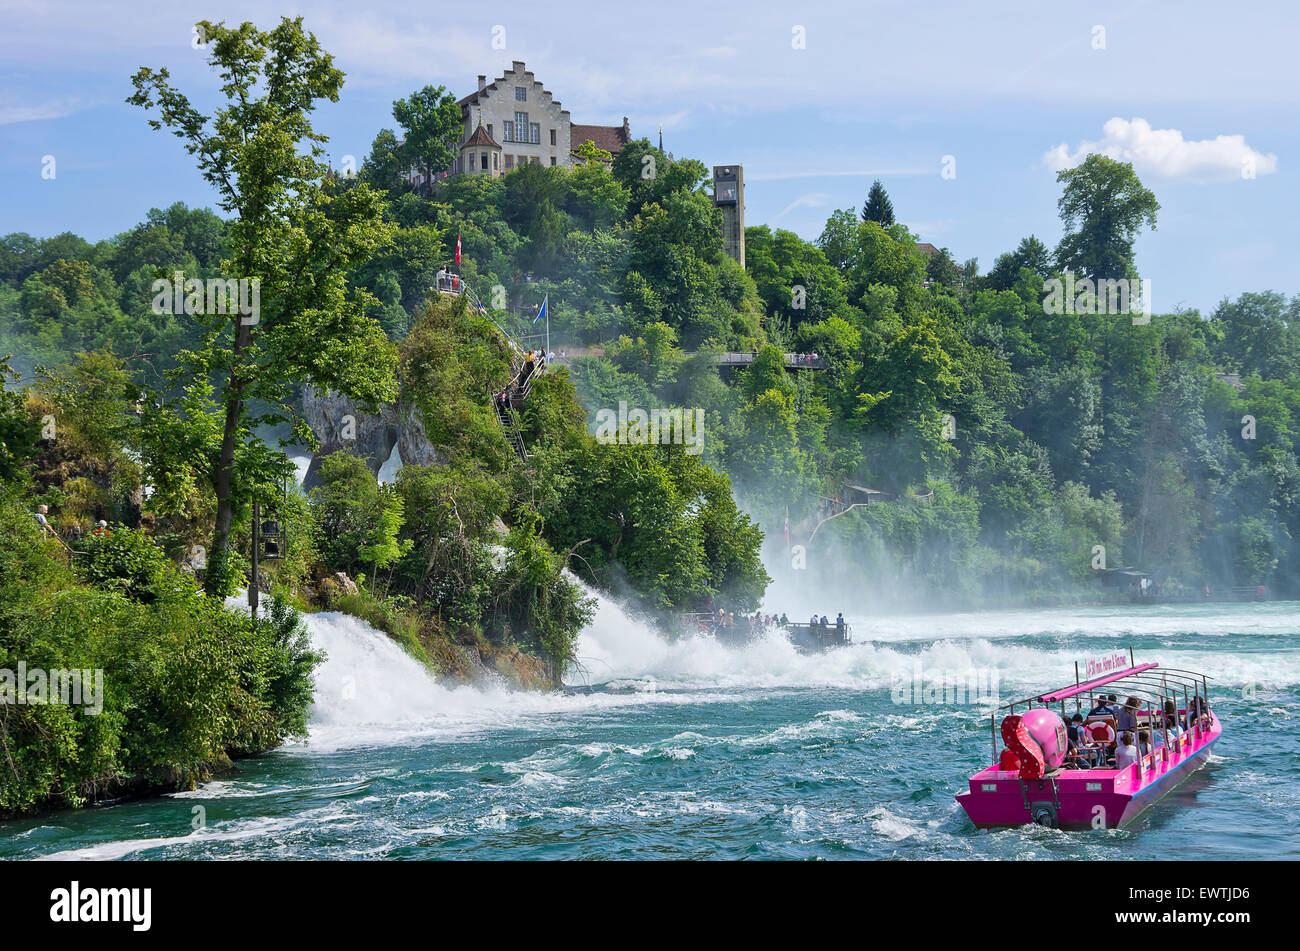 The Rhine Falls with excursion boat and Lauffen Castle, Schaffhausen, Switzerland. Stock Photo